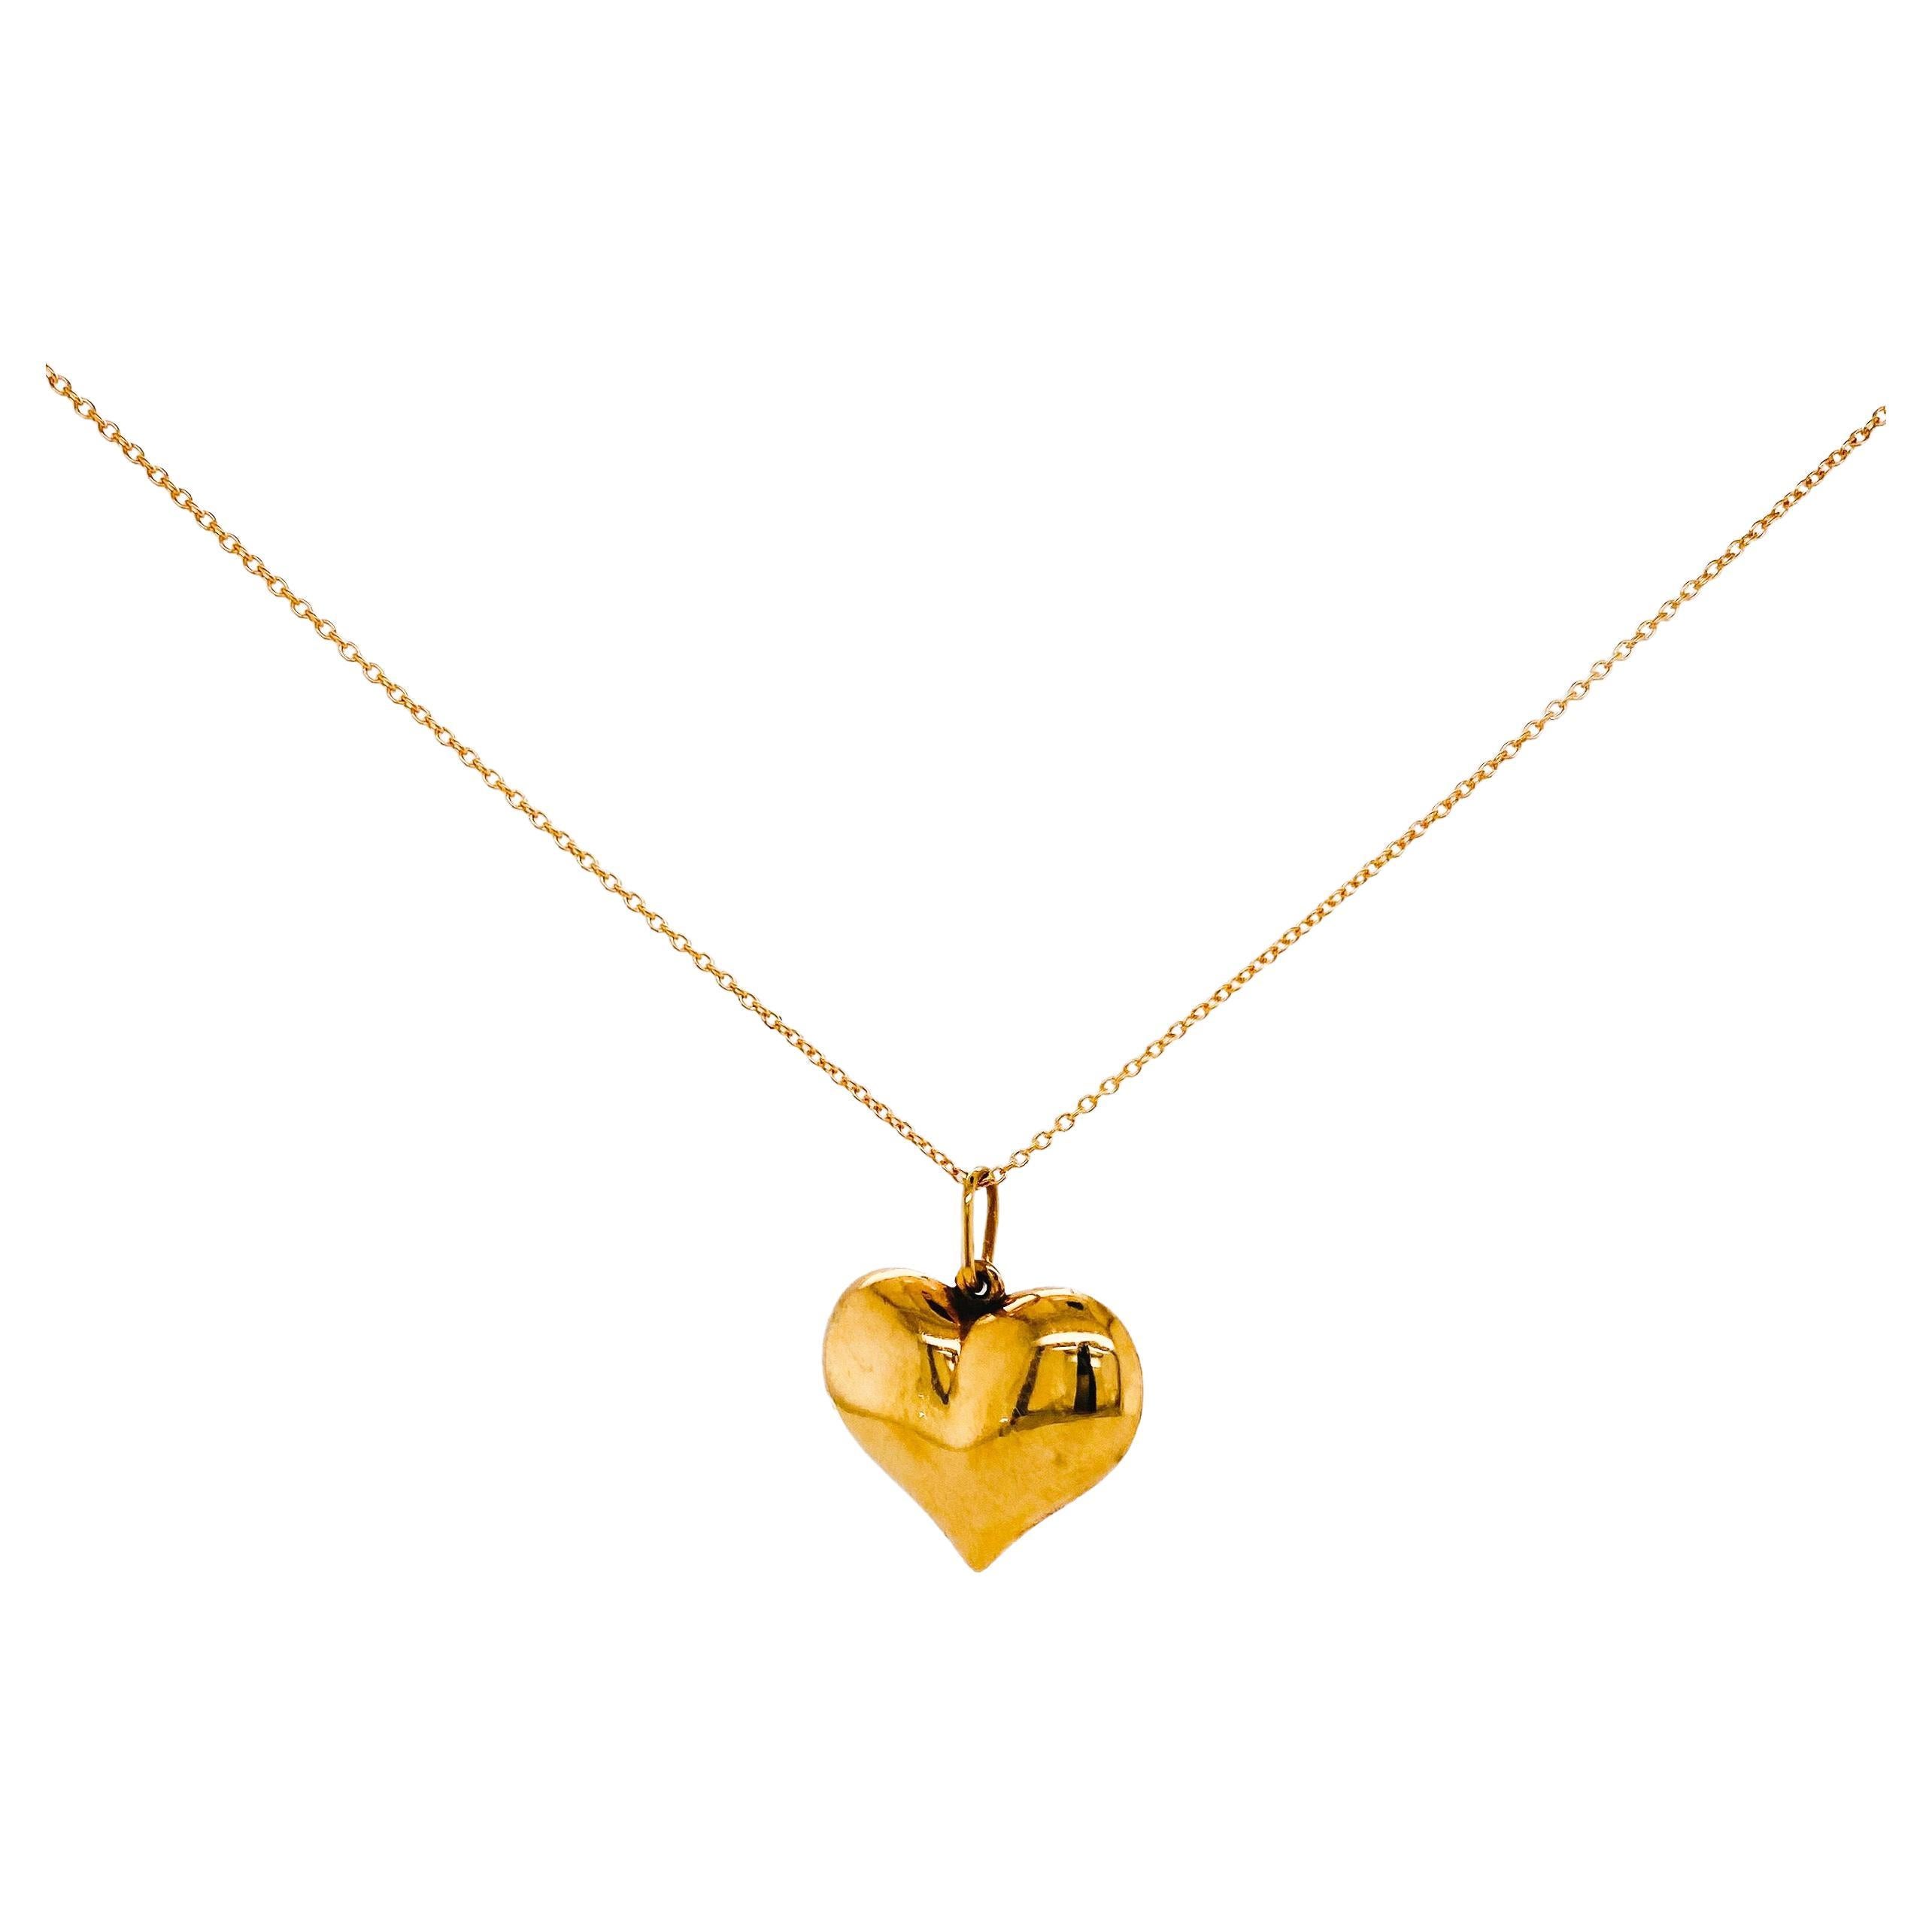 Keep your love light and bright with this vintage 3D heart pendant charm. The heart is created in a lightweight design while still full of your love with the 3D curved structure. Make your heart's desire as light and happy as this vintage heart. The